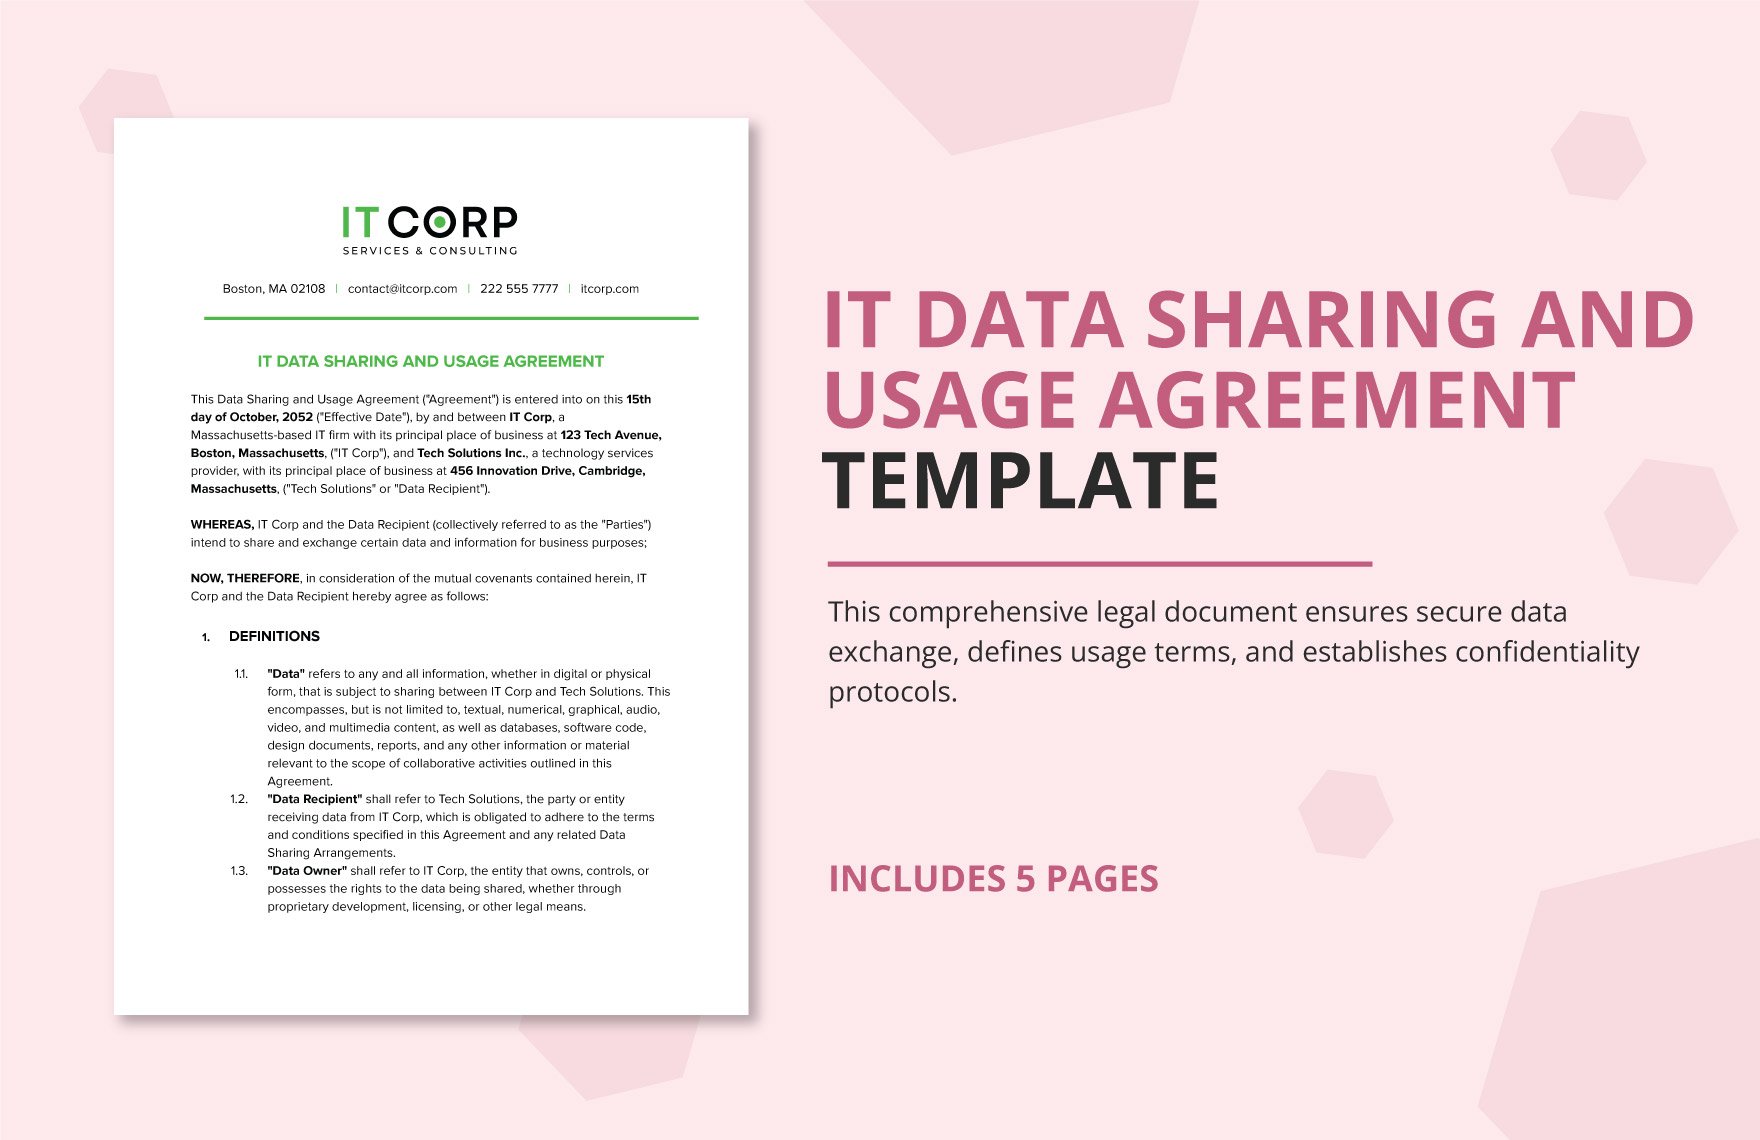 IT Data Sharing and Usage Agreement Template